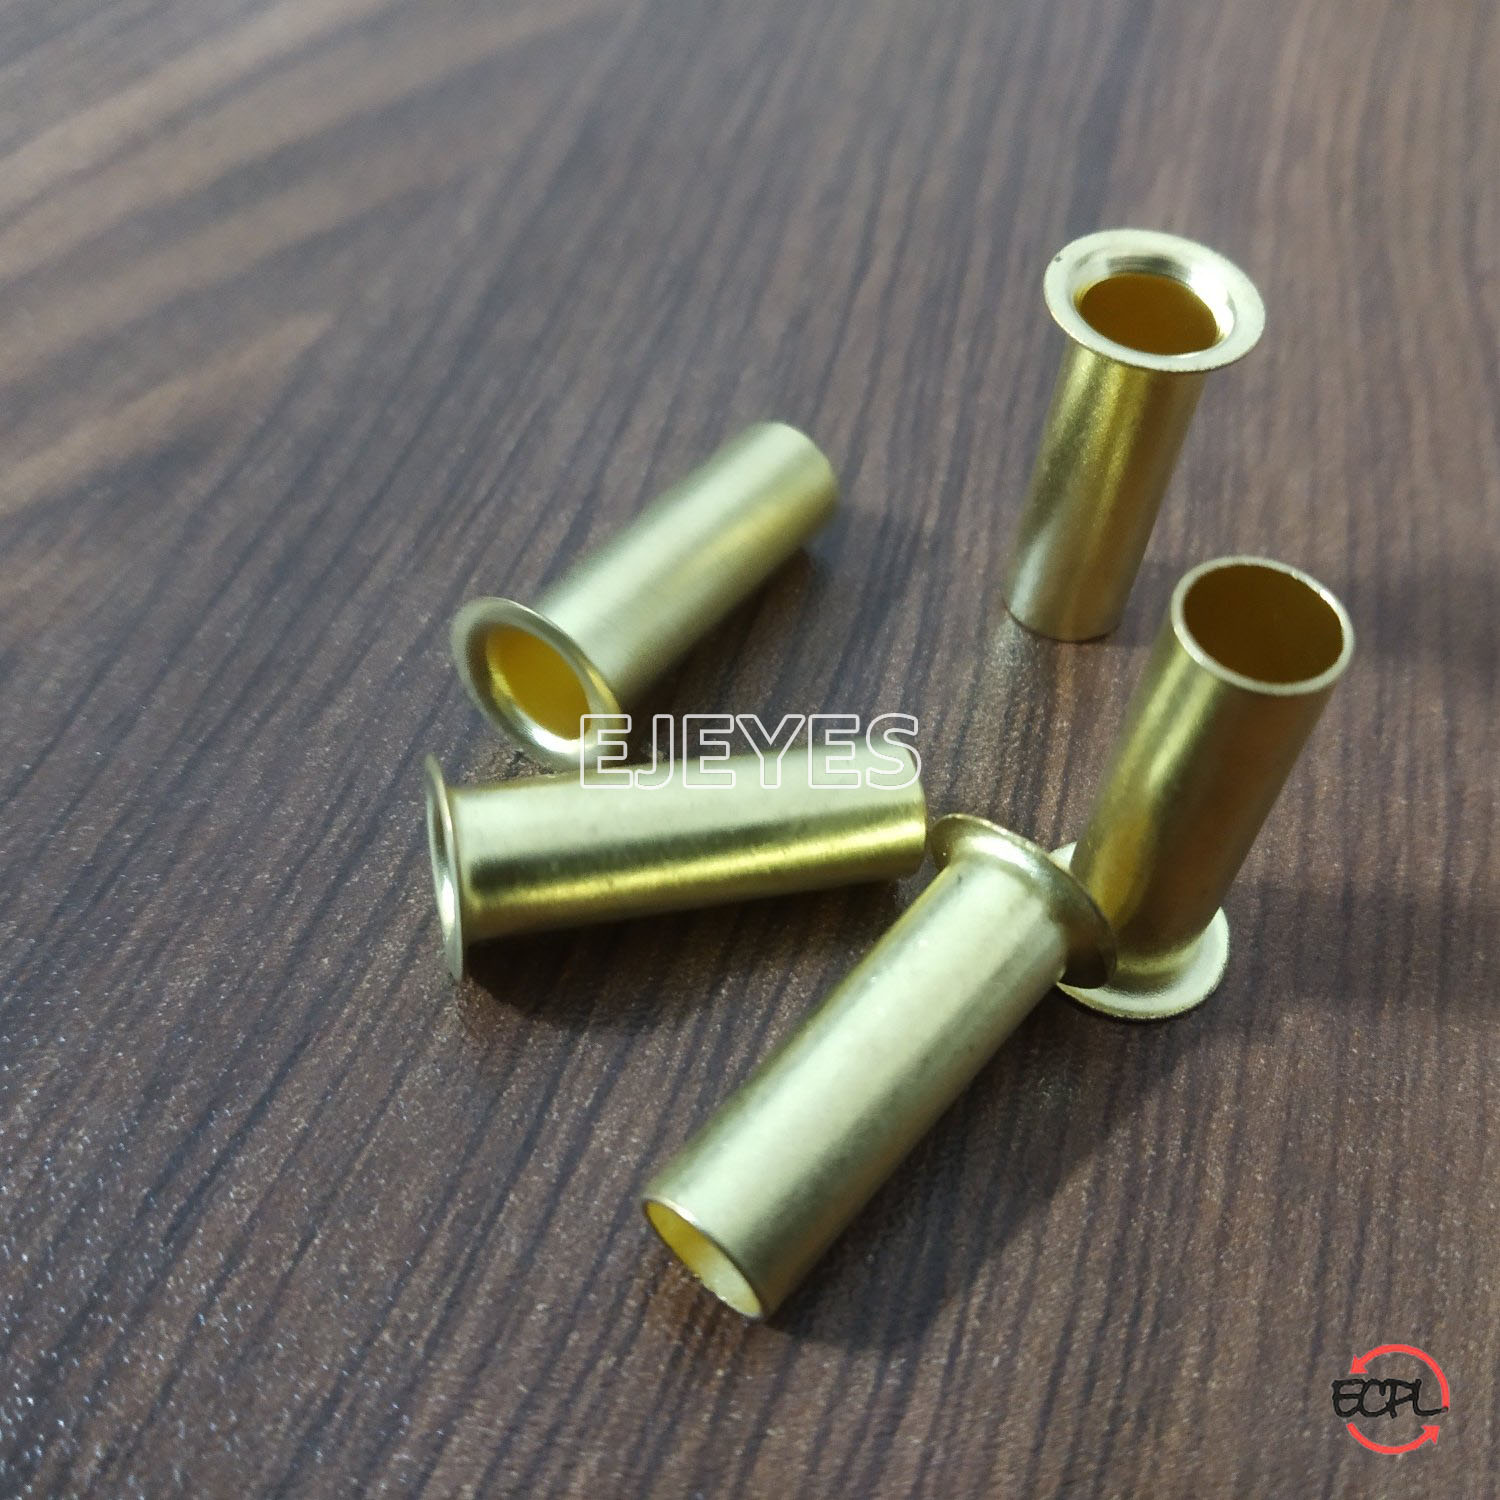 Brass tubular rivet 2120: A reliable and robust hardware component, essential for secure and durable.